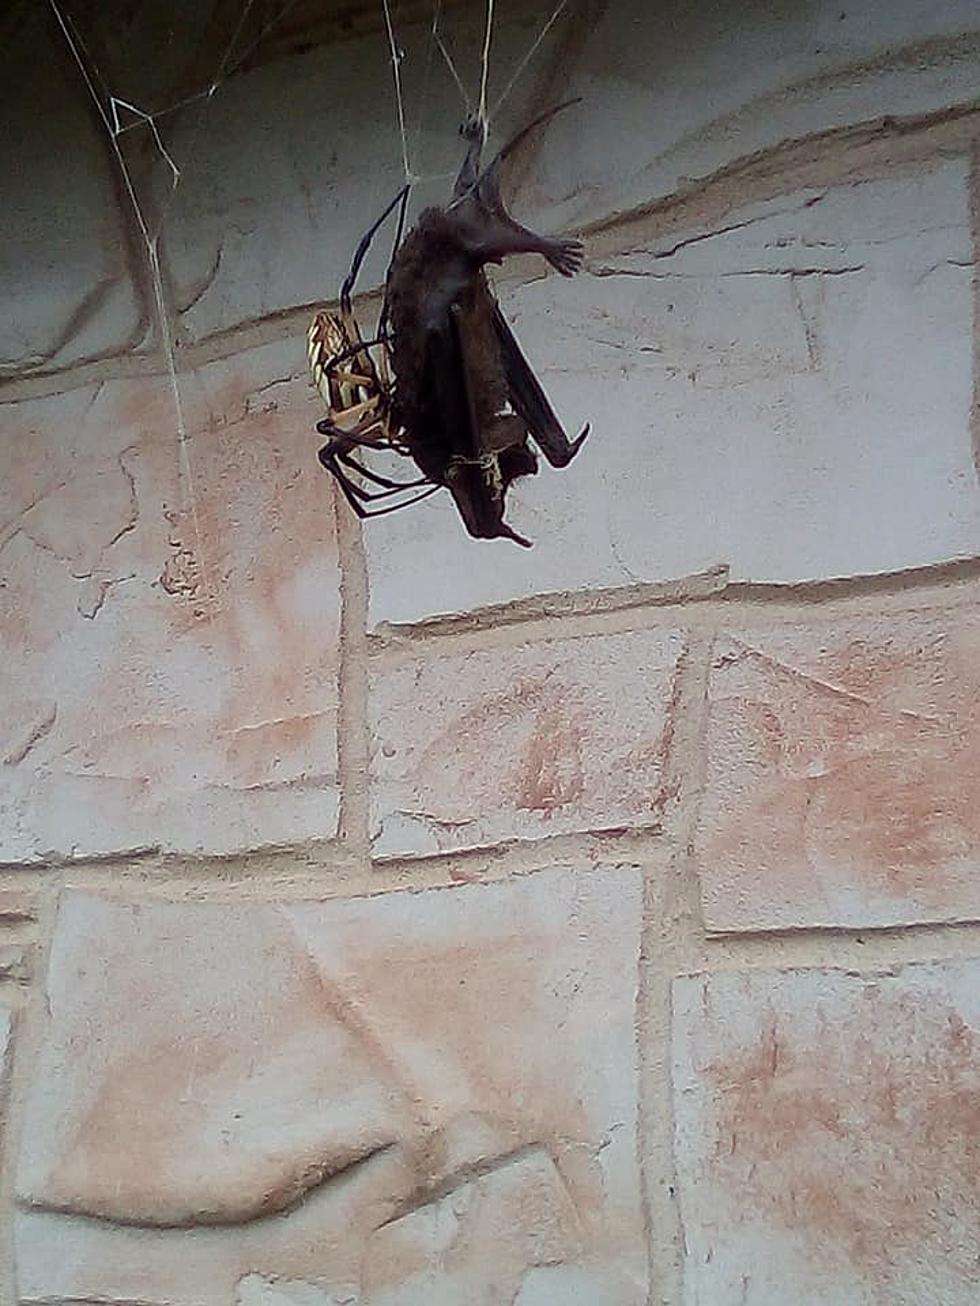 Texas Woman Shares Photos of Spider Attacking a Bat Outside Her Home